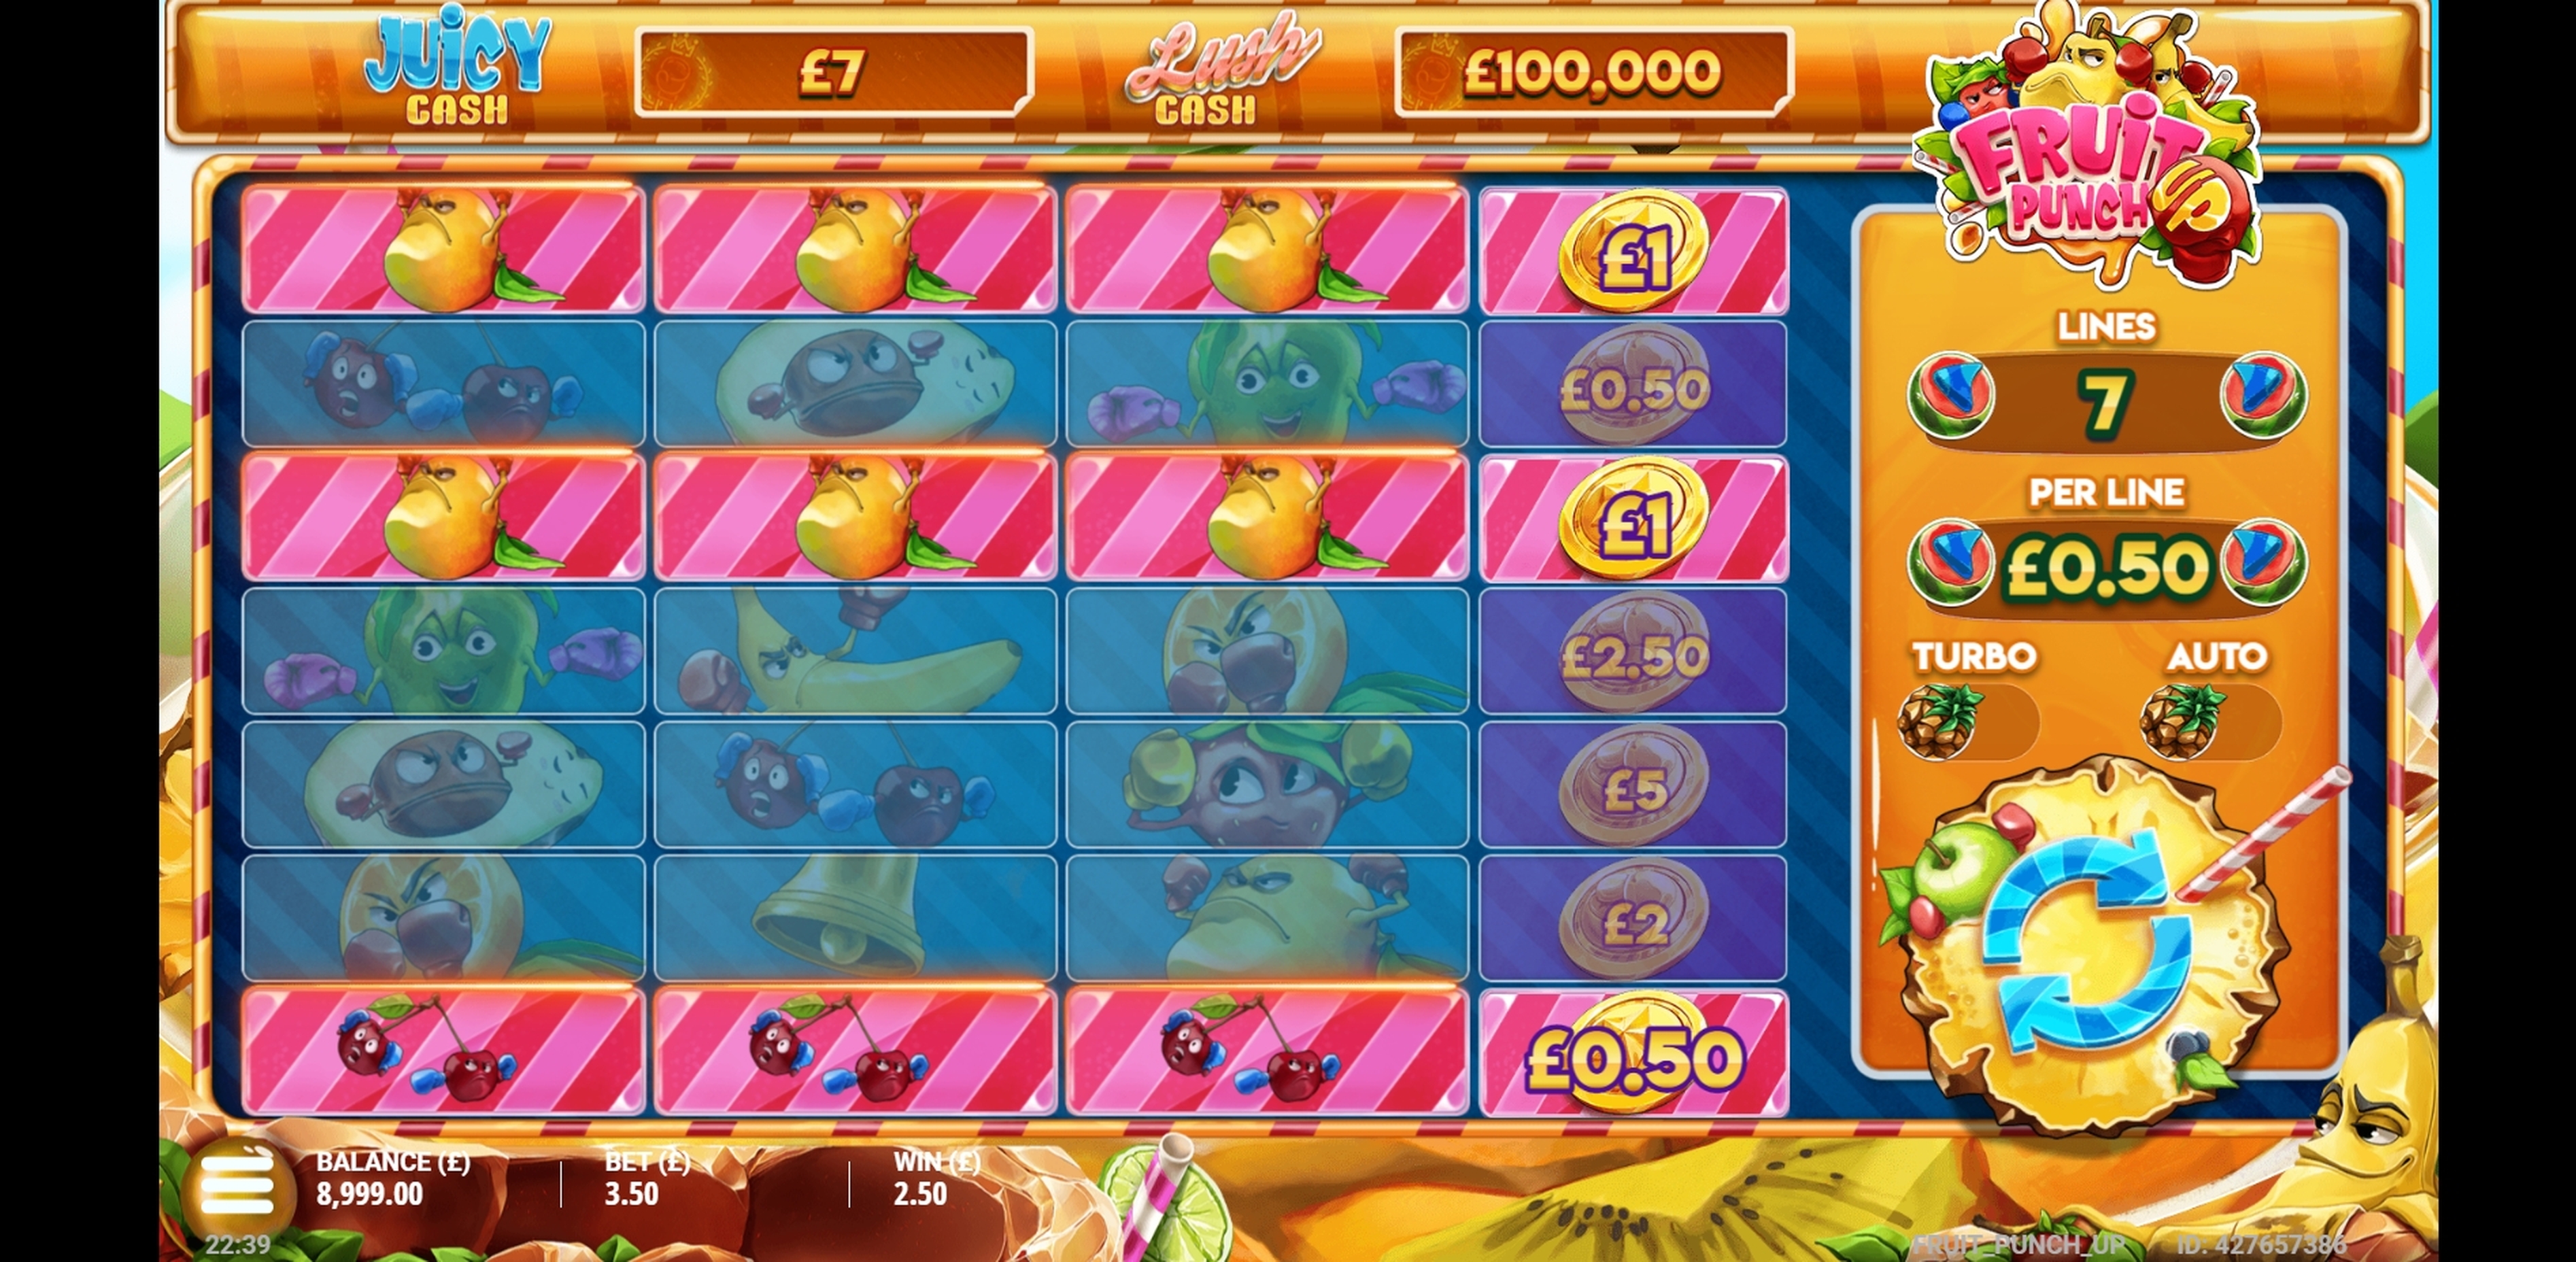 Win Money in Fruit Punch Up Free Slot Game by Gluck Games